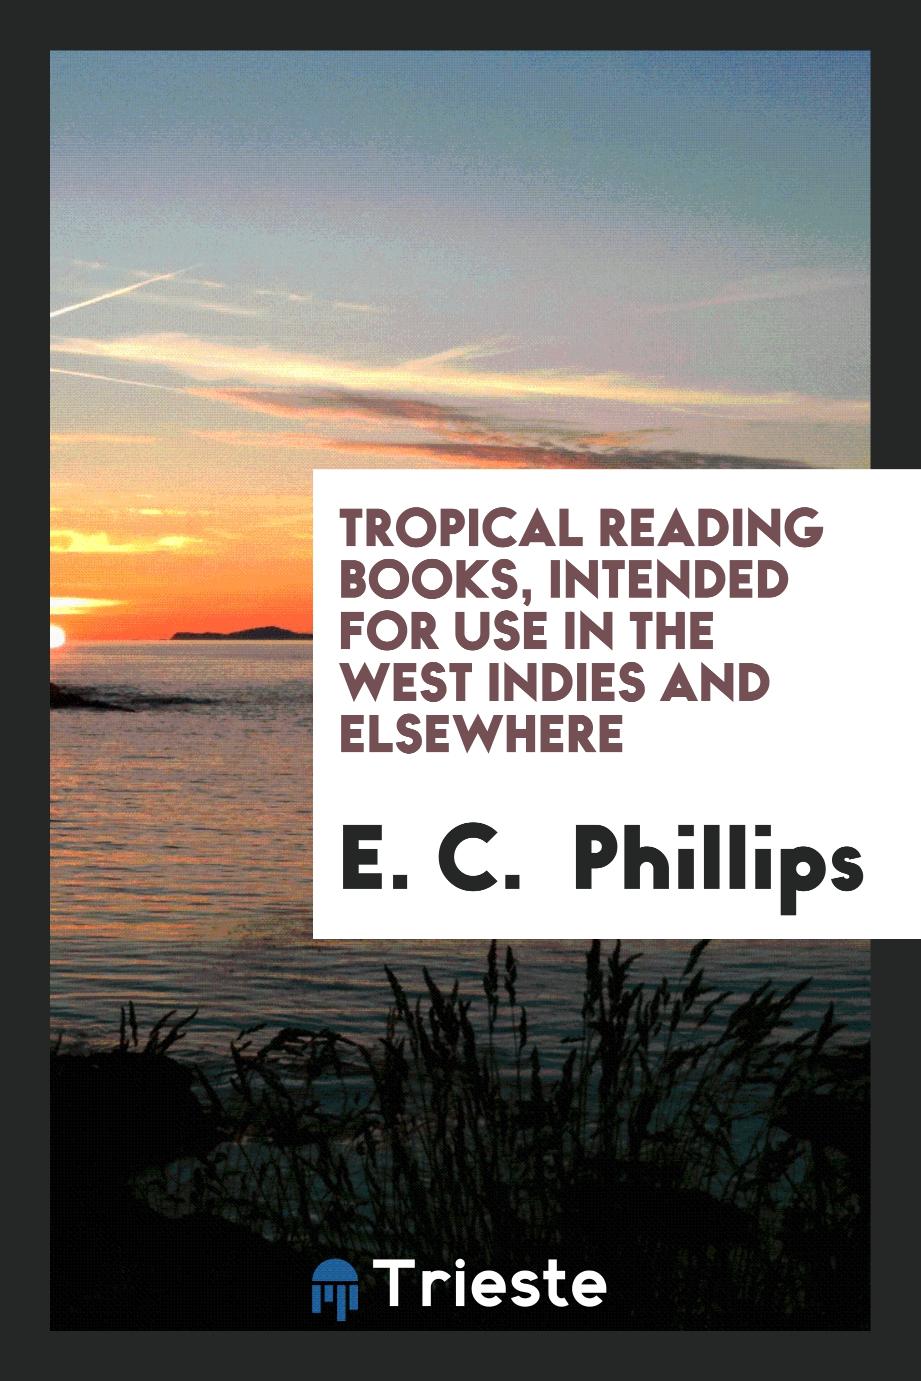 Tropical Reading Books, Intended for Use in the West Indies and Elsewhere